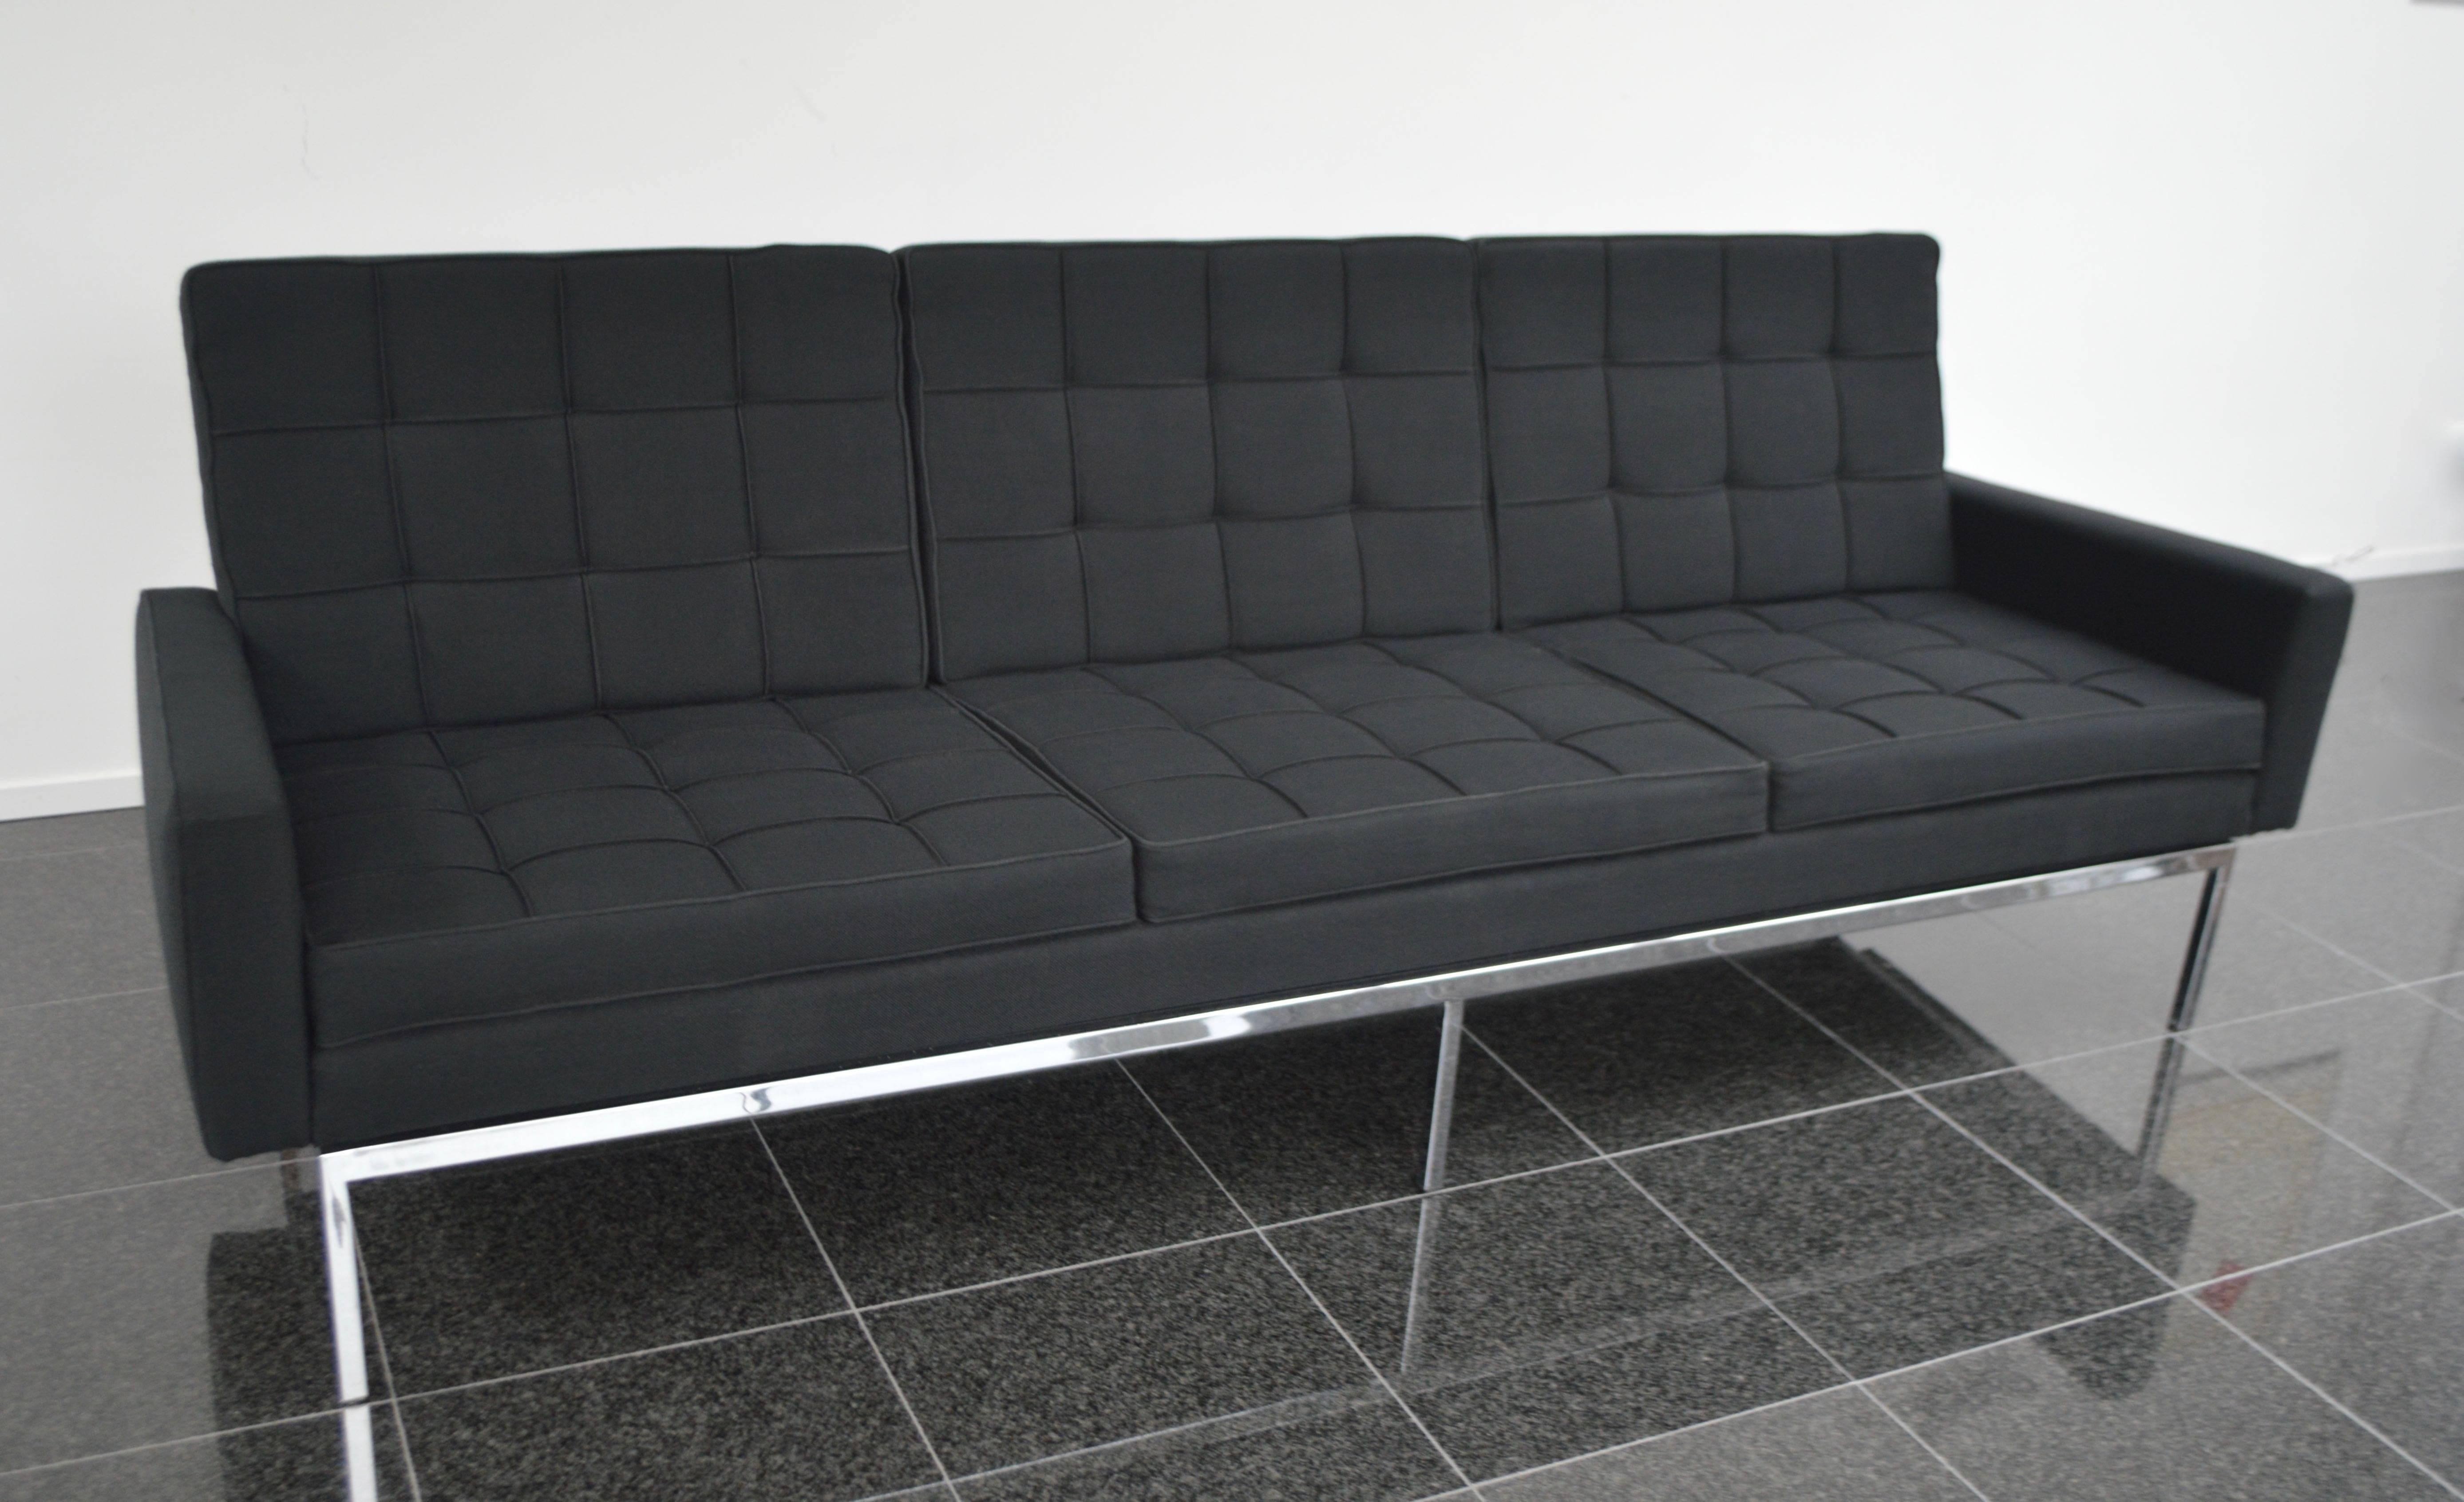 Sofa model 67A was designed in 1958 by American designer Florence Knoll and discontinued from production in 1975 and has not been made ever since.
This example is one of the last examples from the mid-1970s production and comes with a pristine